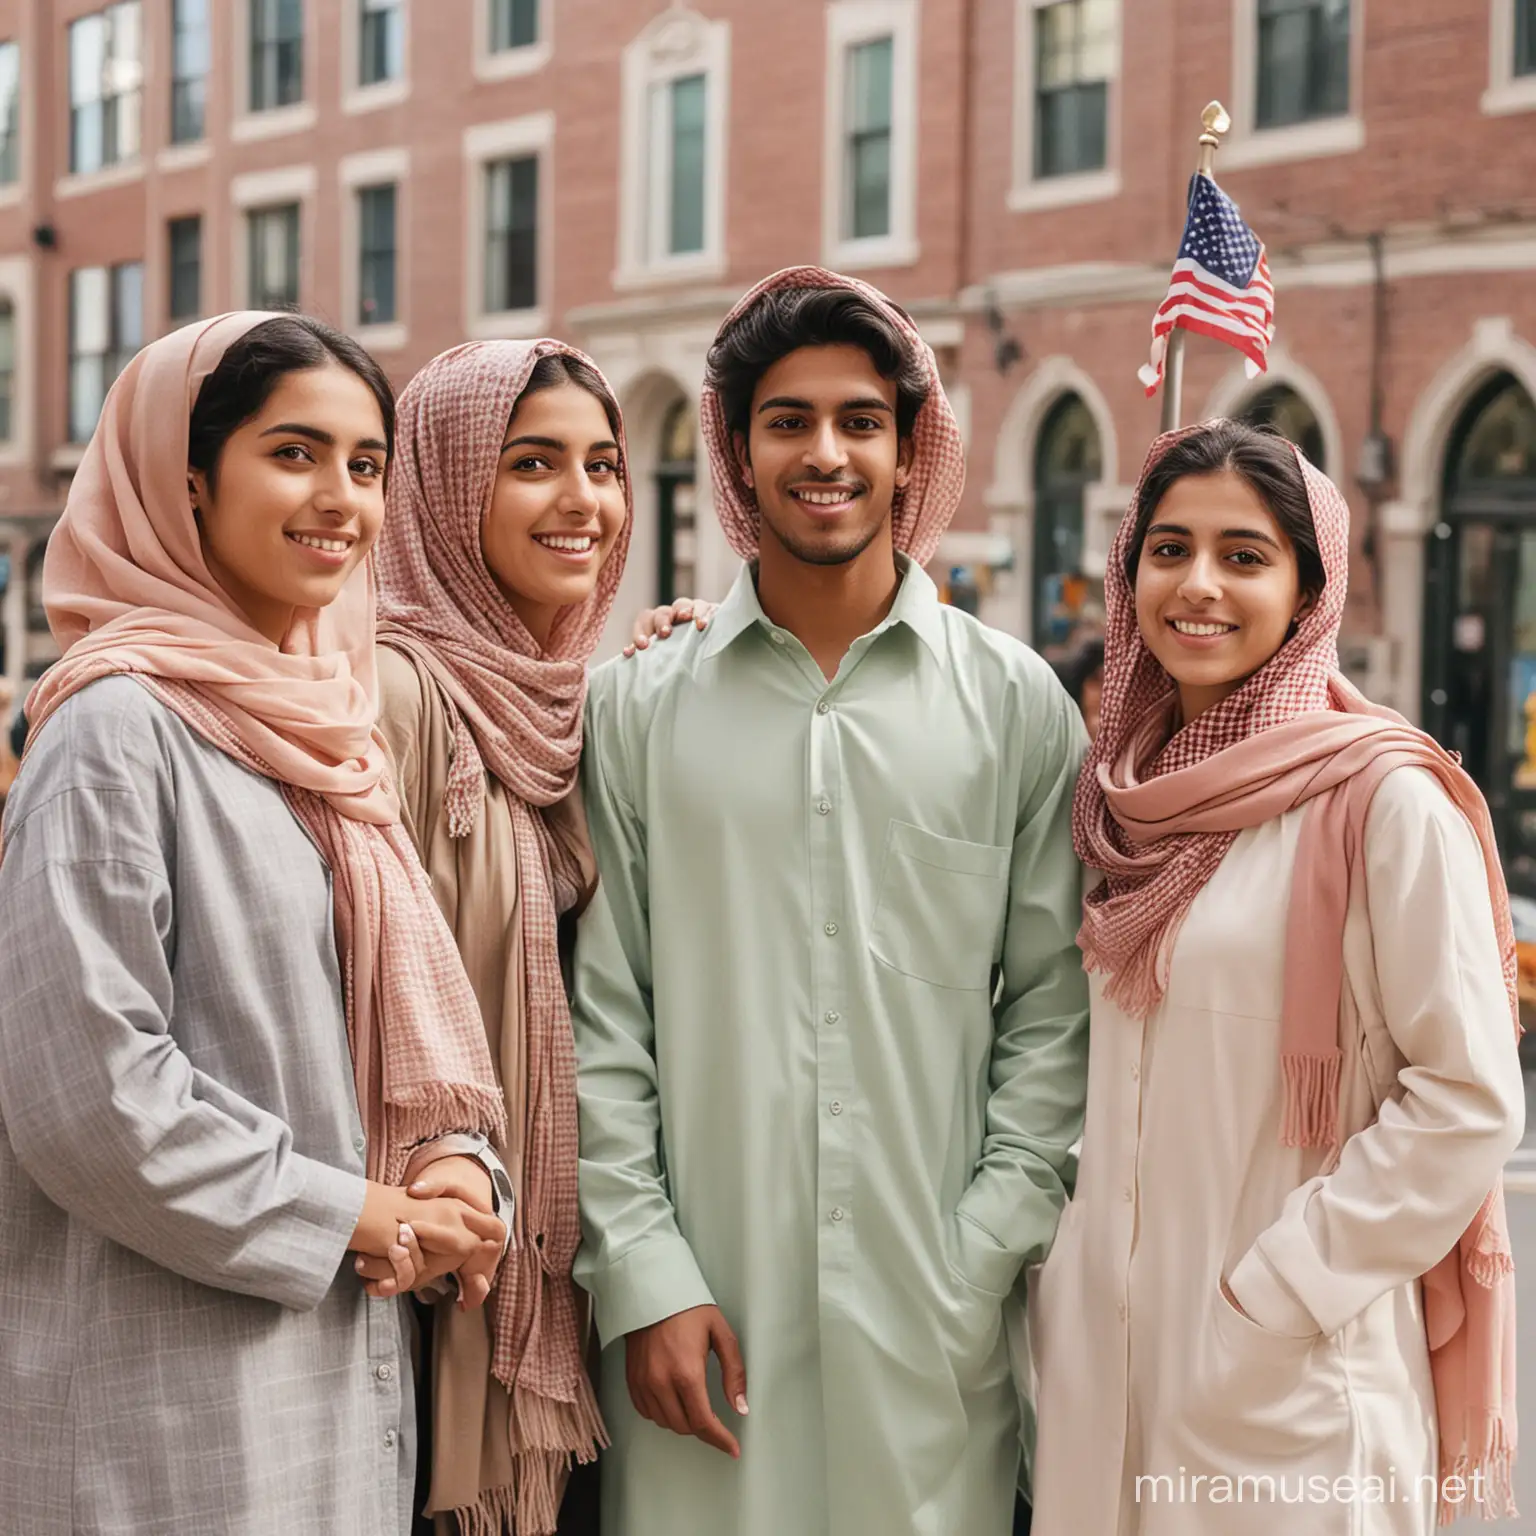 create an image of a suadi male student live in boston with his three sisters